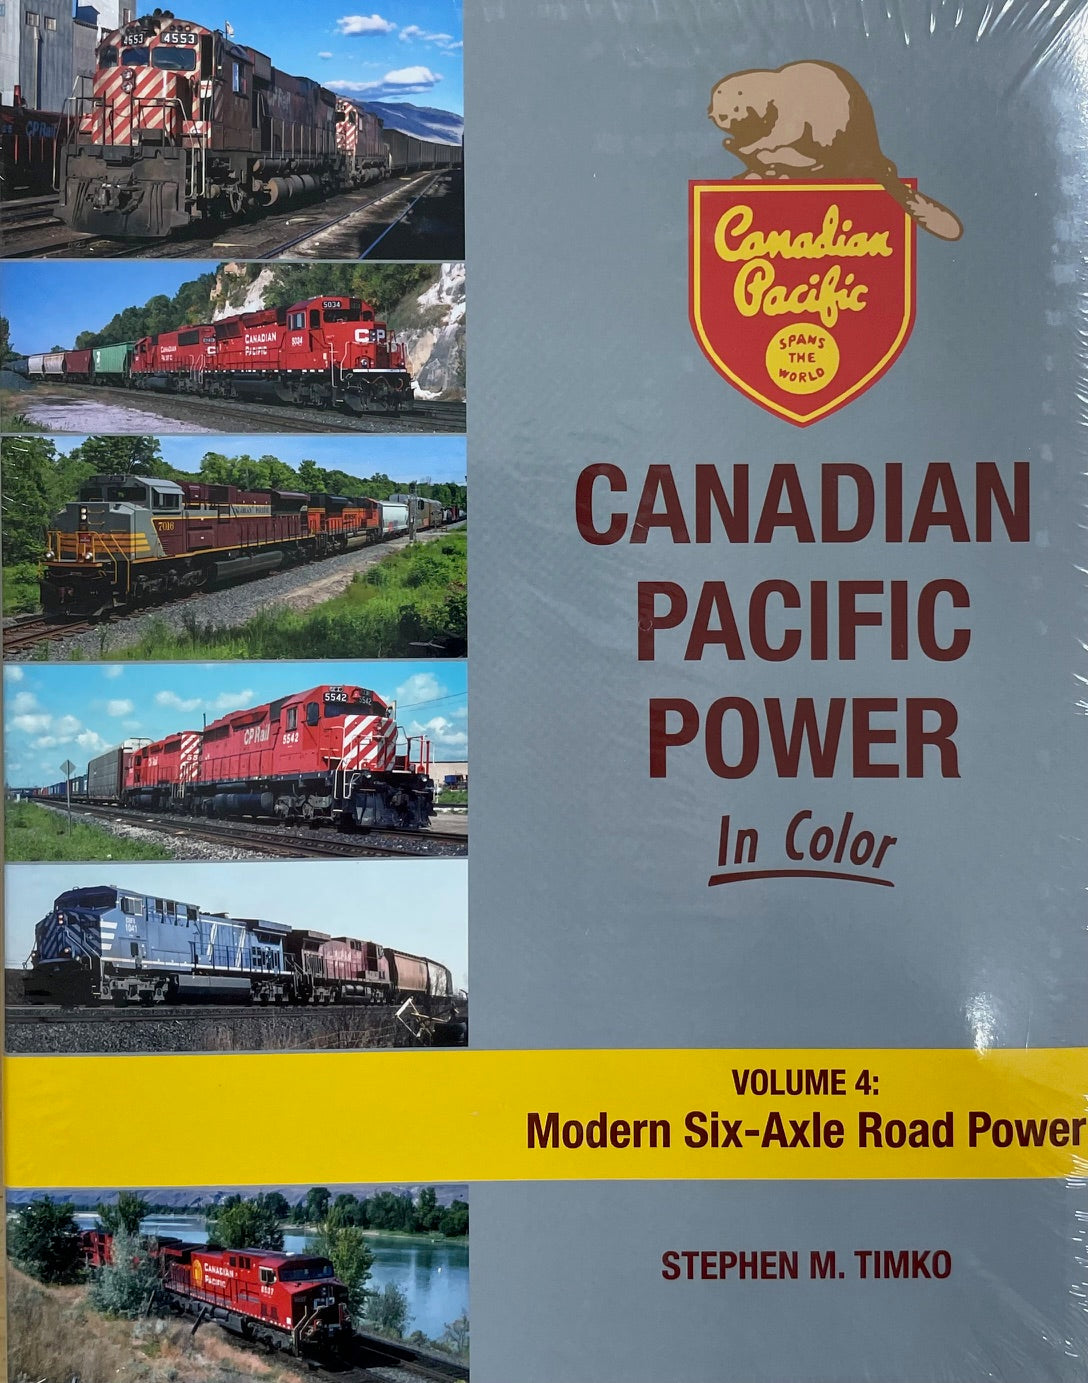 CP Canadian Pacific Power Railroad Railway Volume 4 Six-Axle Illustrated History Book